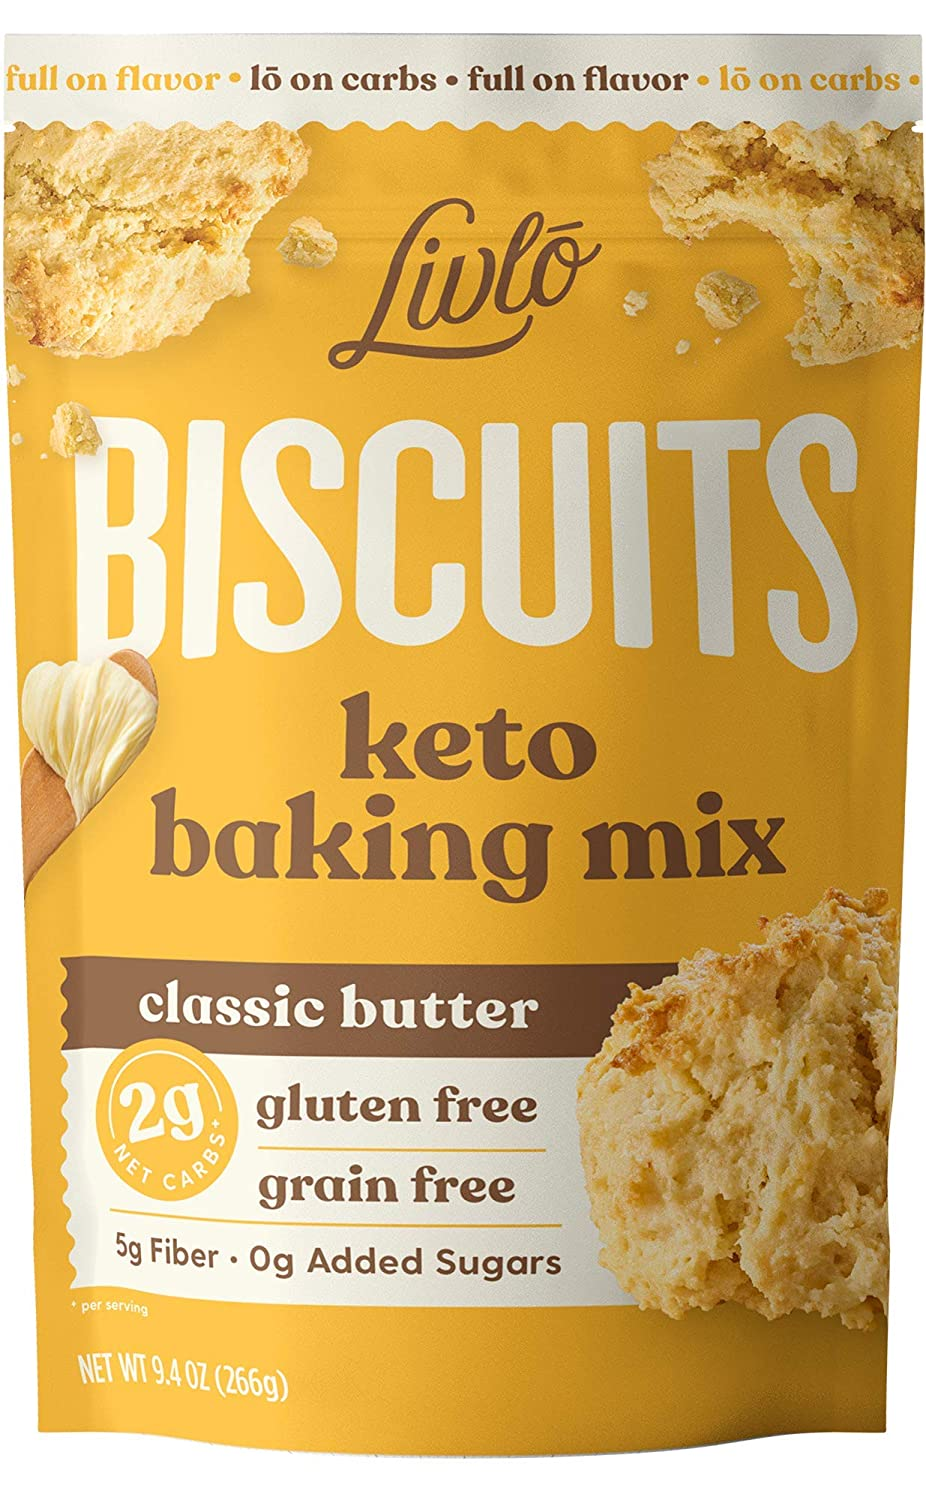 Amazon.com : Livlo Keto Biscuit & Bread Mix - Low Carb & Gluten Free Baking Mix 2g Net Carbs10 Servings - Classic Butter Biscuits